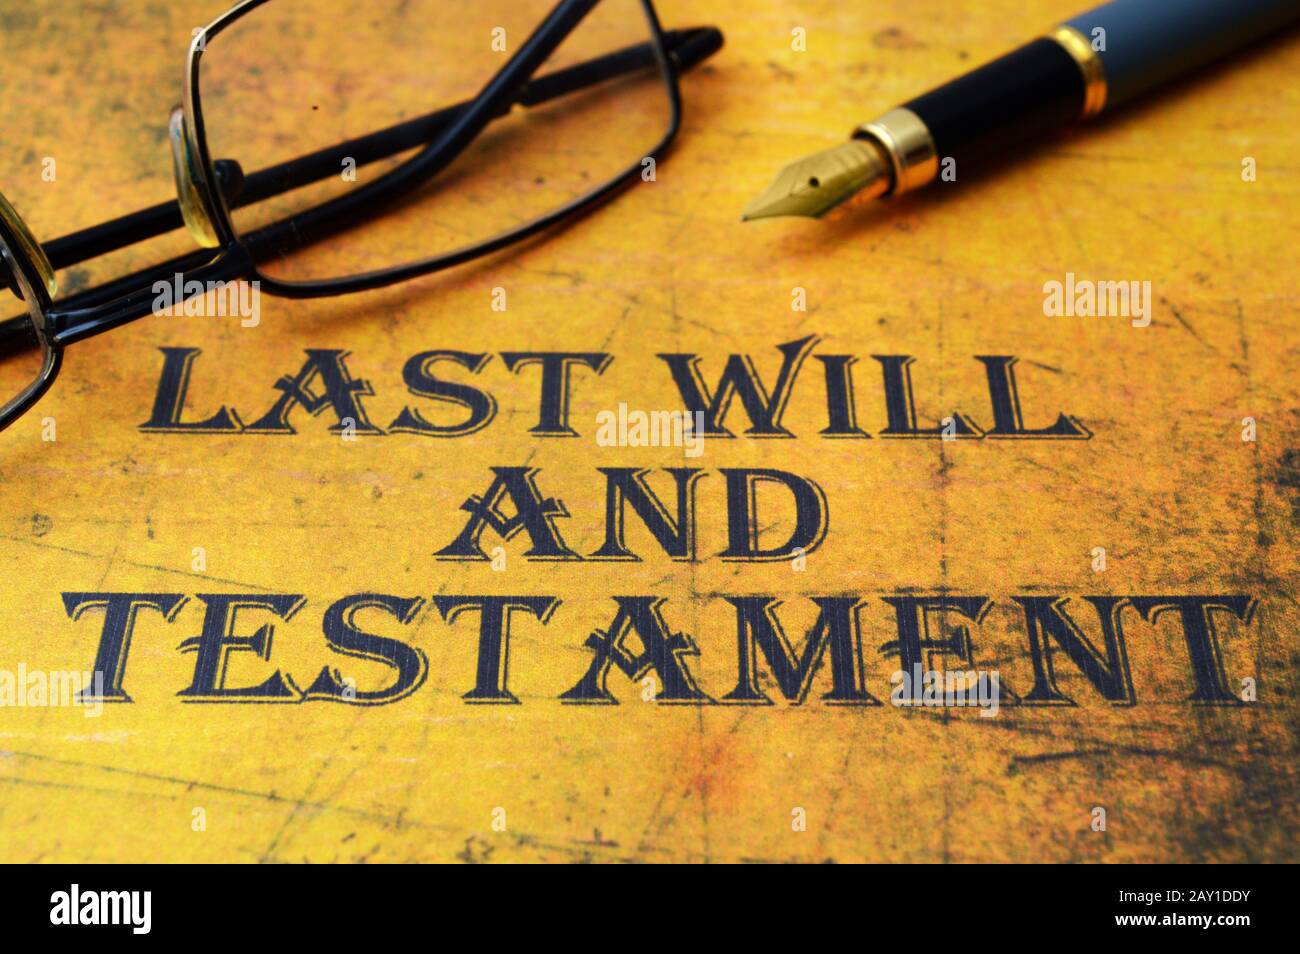 Last will and testament Stock Photo